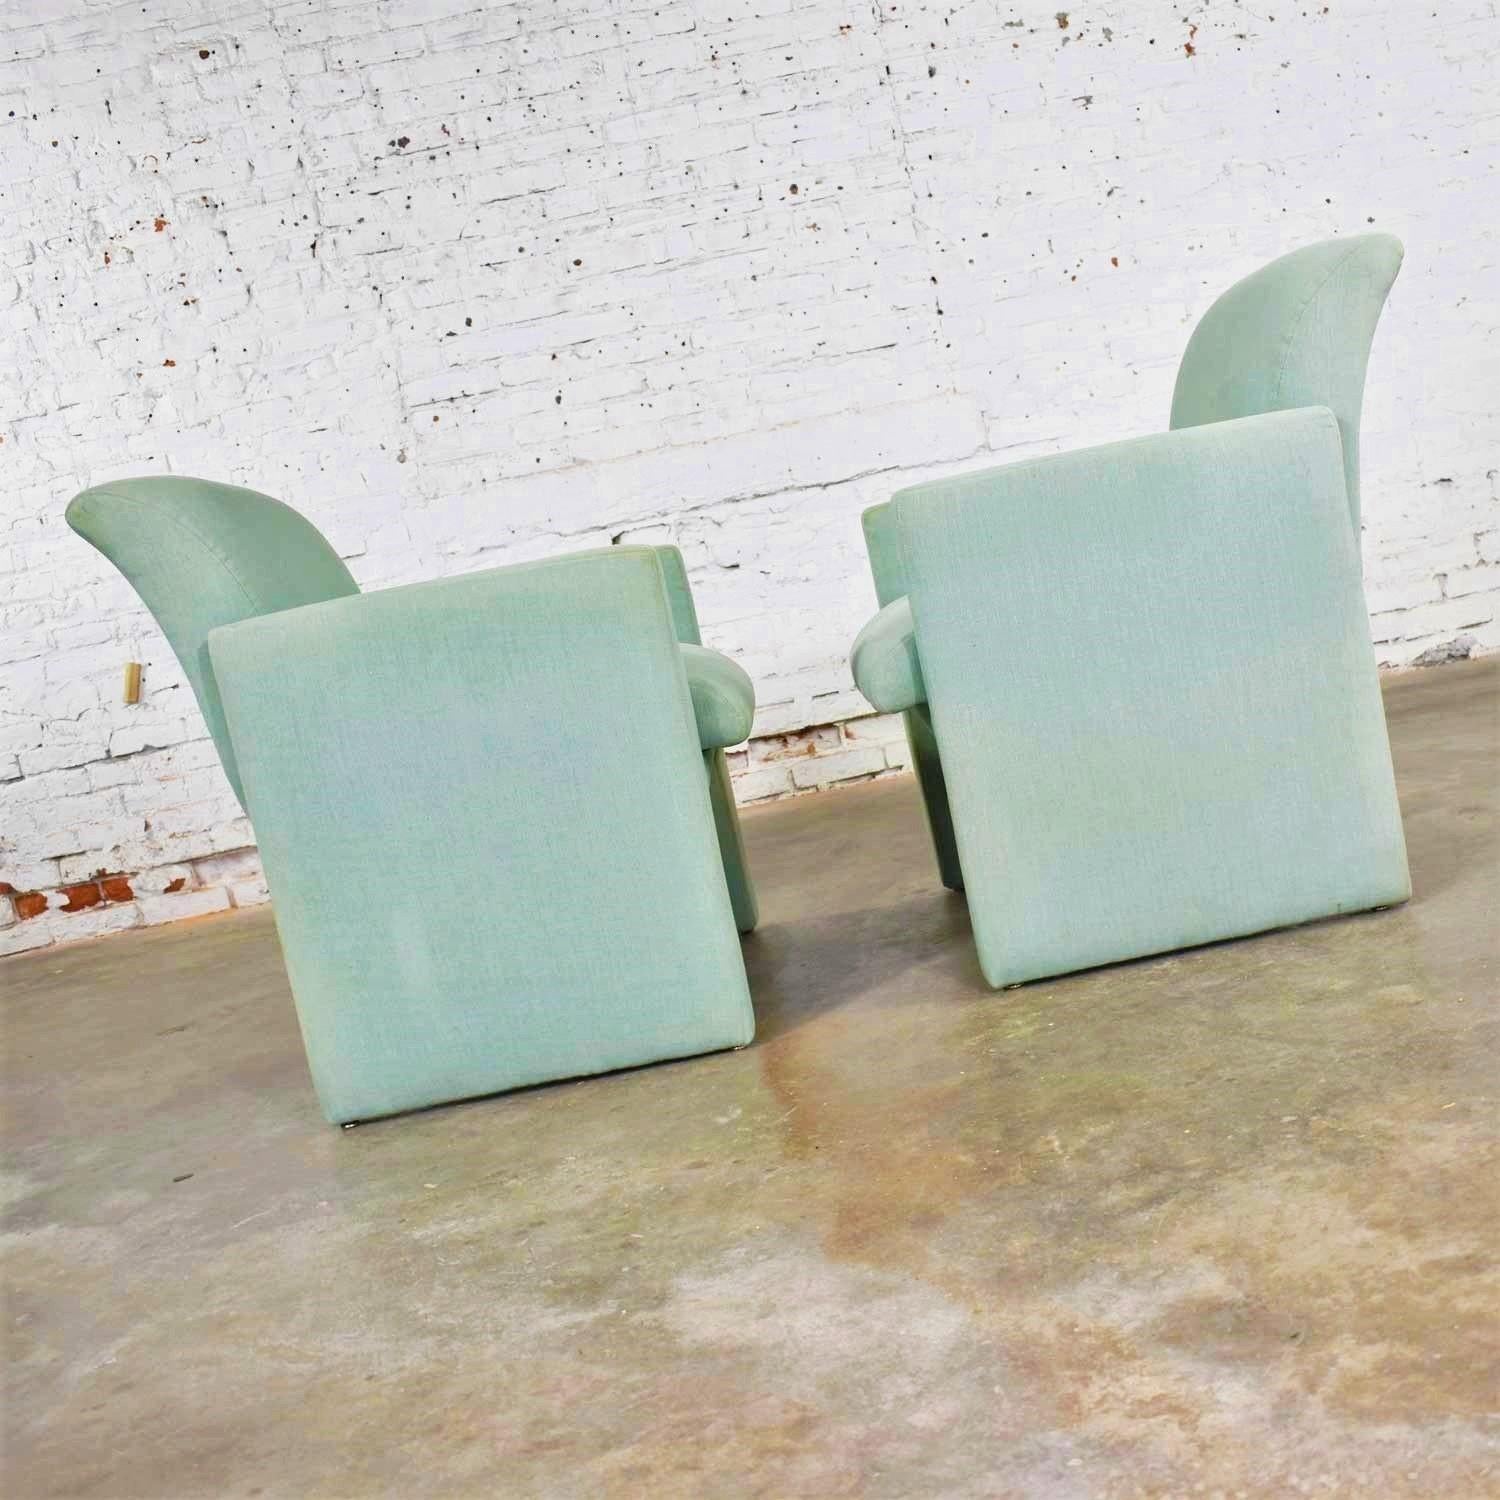 Pair of Petite Modern Accent Chairs in Sea Green 1